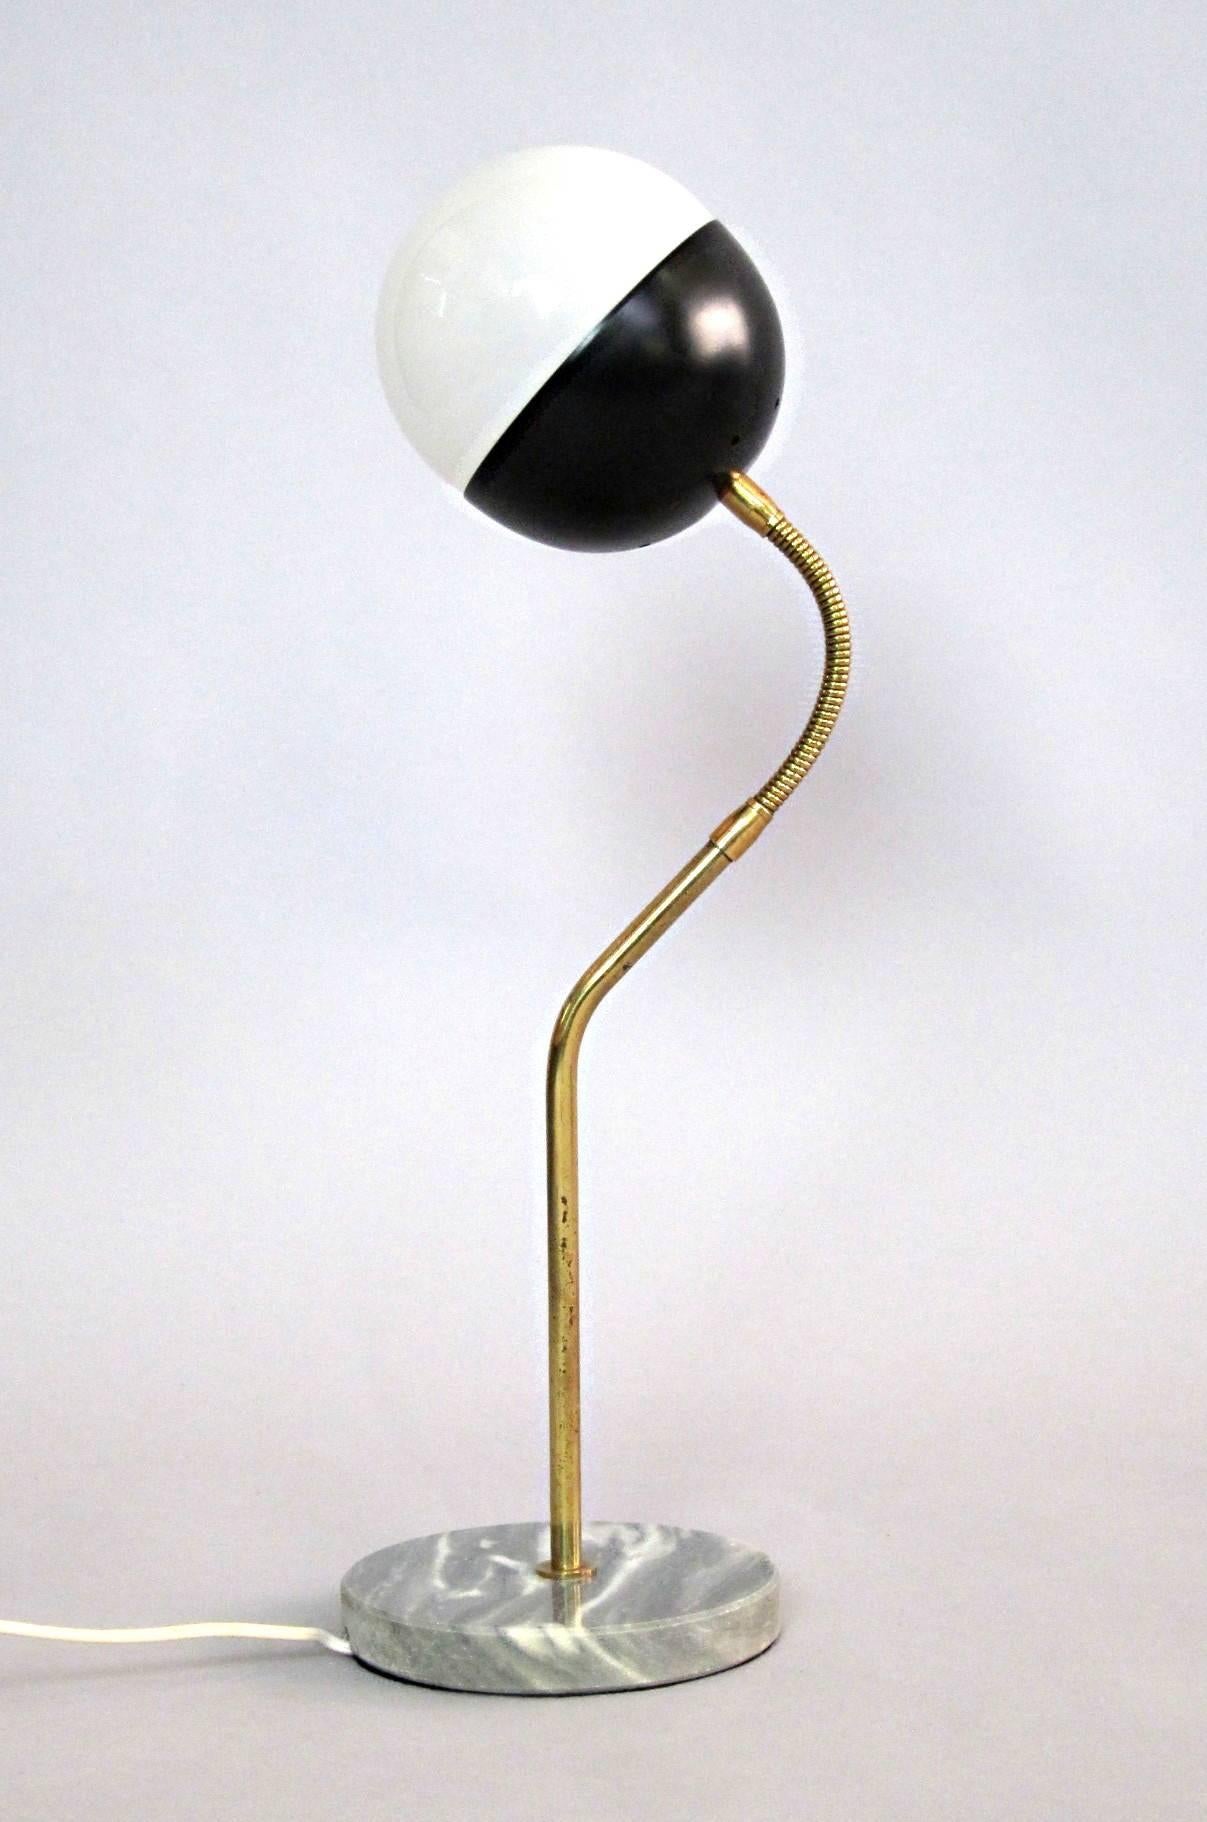 Subtitle brass goose neck lamp with opaline glass globe, marble base,
manufactured by Stilnovo, Italy 1960s.